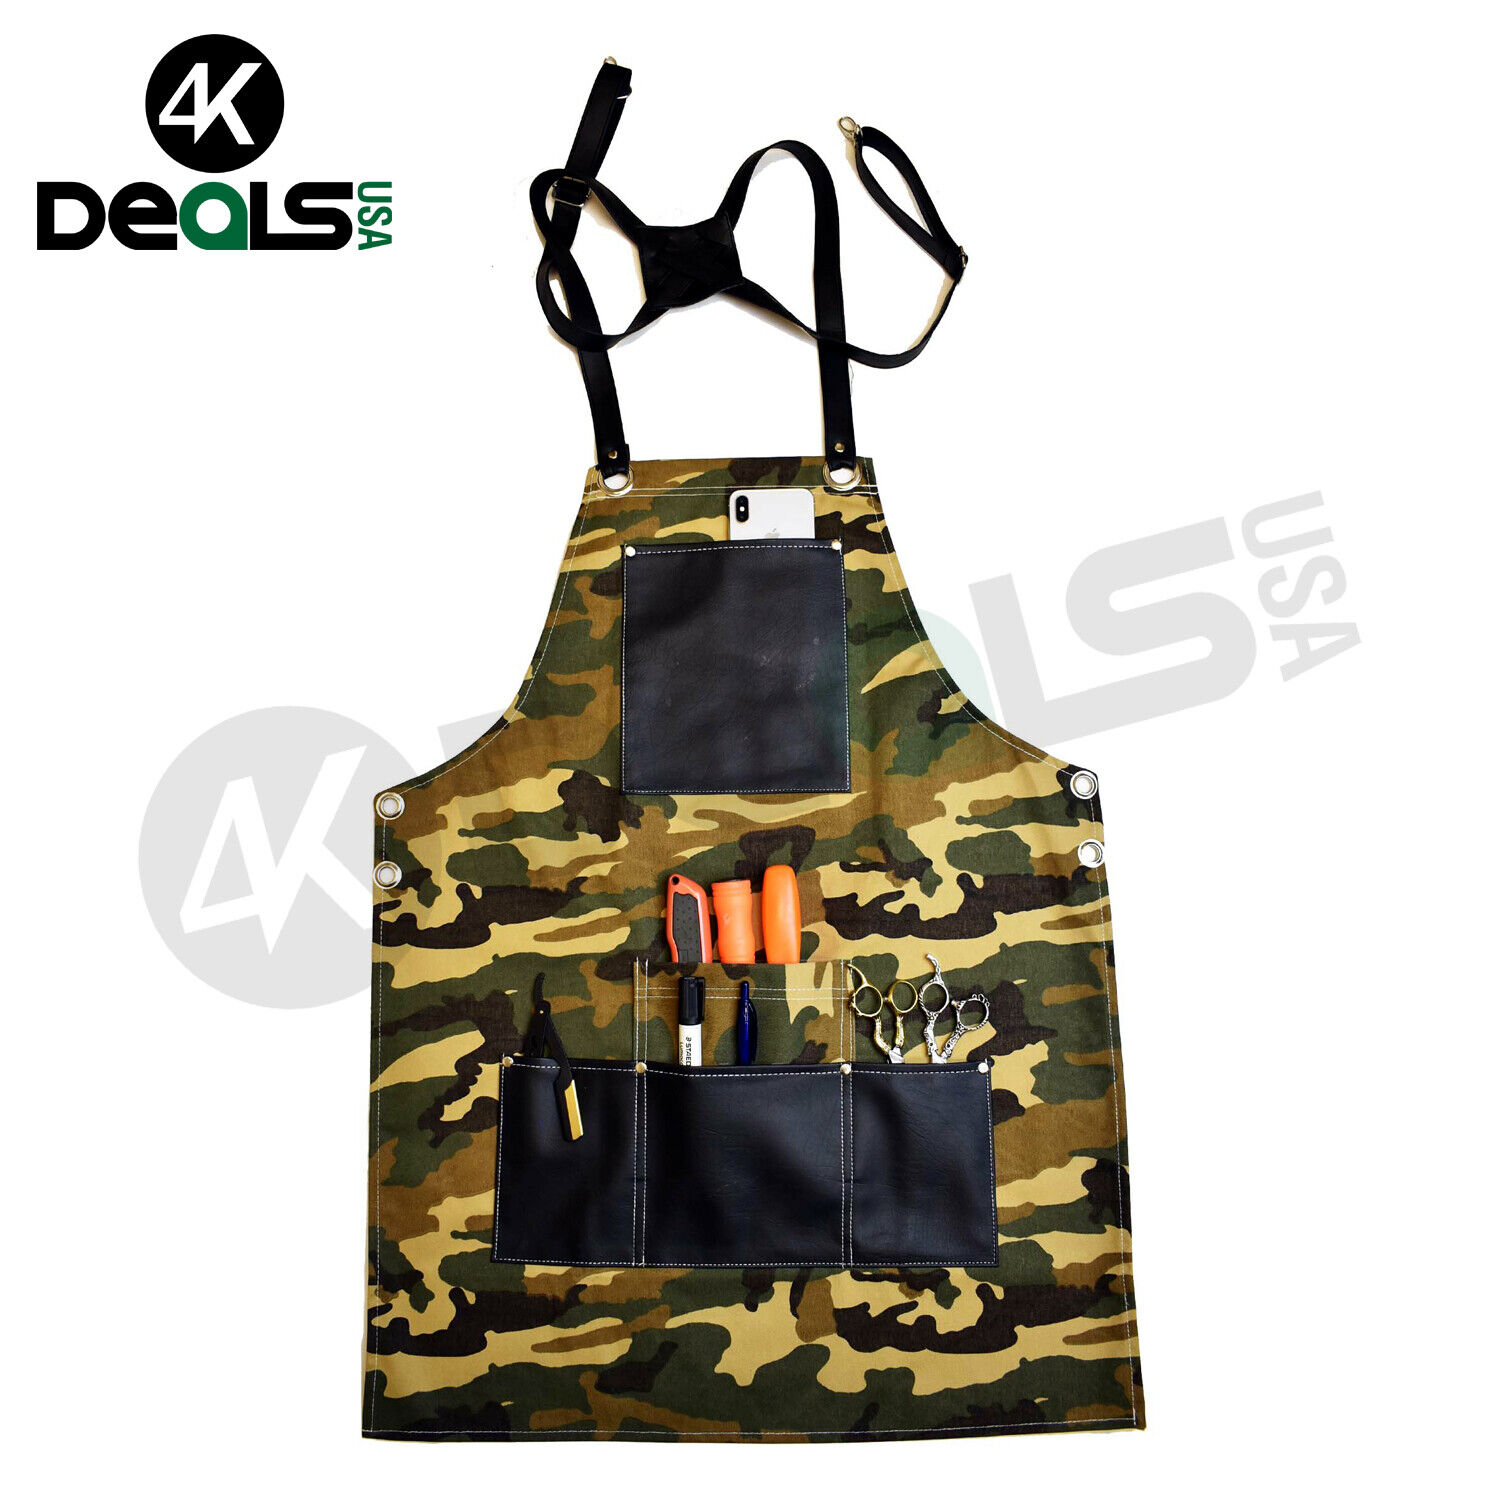 Dealing full price reduction Hair Stylist Apron 2021 spring and summer new For Salon Barber Styling Haircut Hairdresser